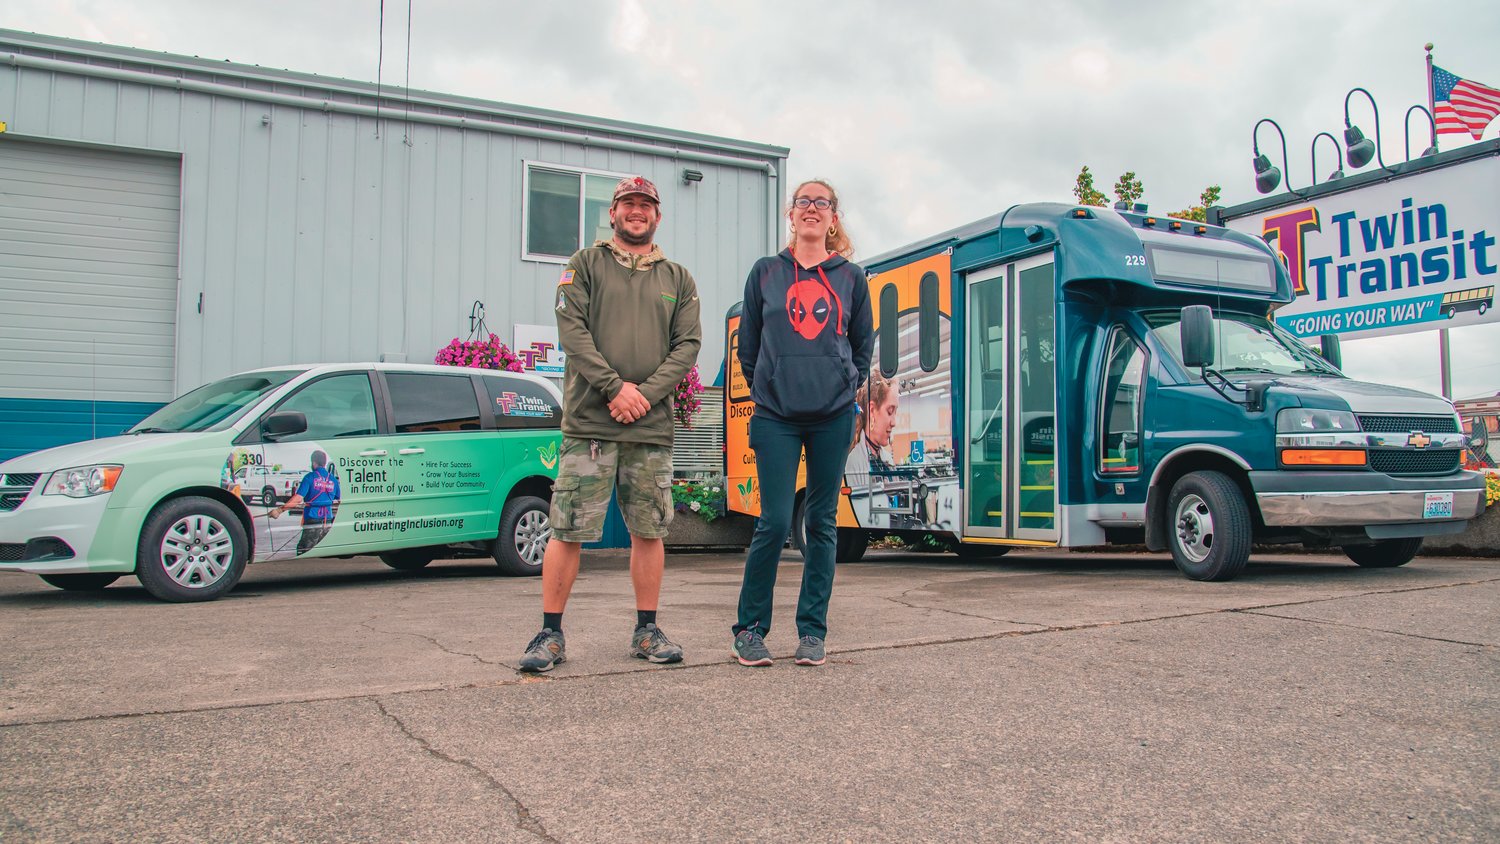 Adrian Rone and Hannah Byrd smile and pose for a photo in front of newly wrapped Twin Transit rides featuring their photos respectively Thursday in Centralia.